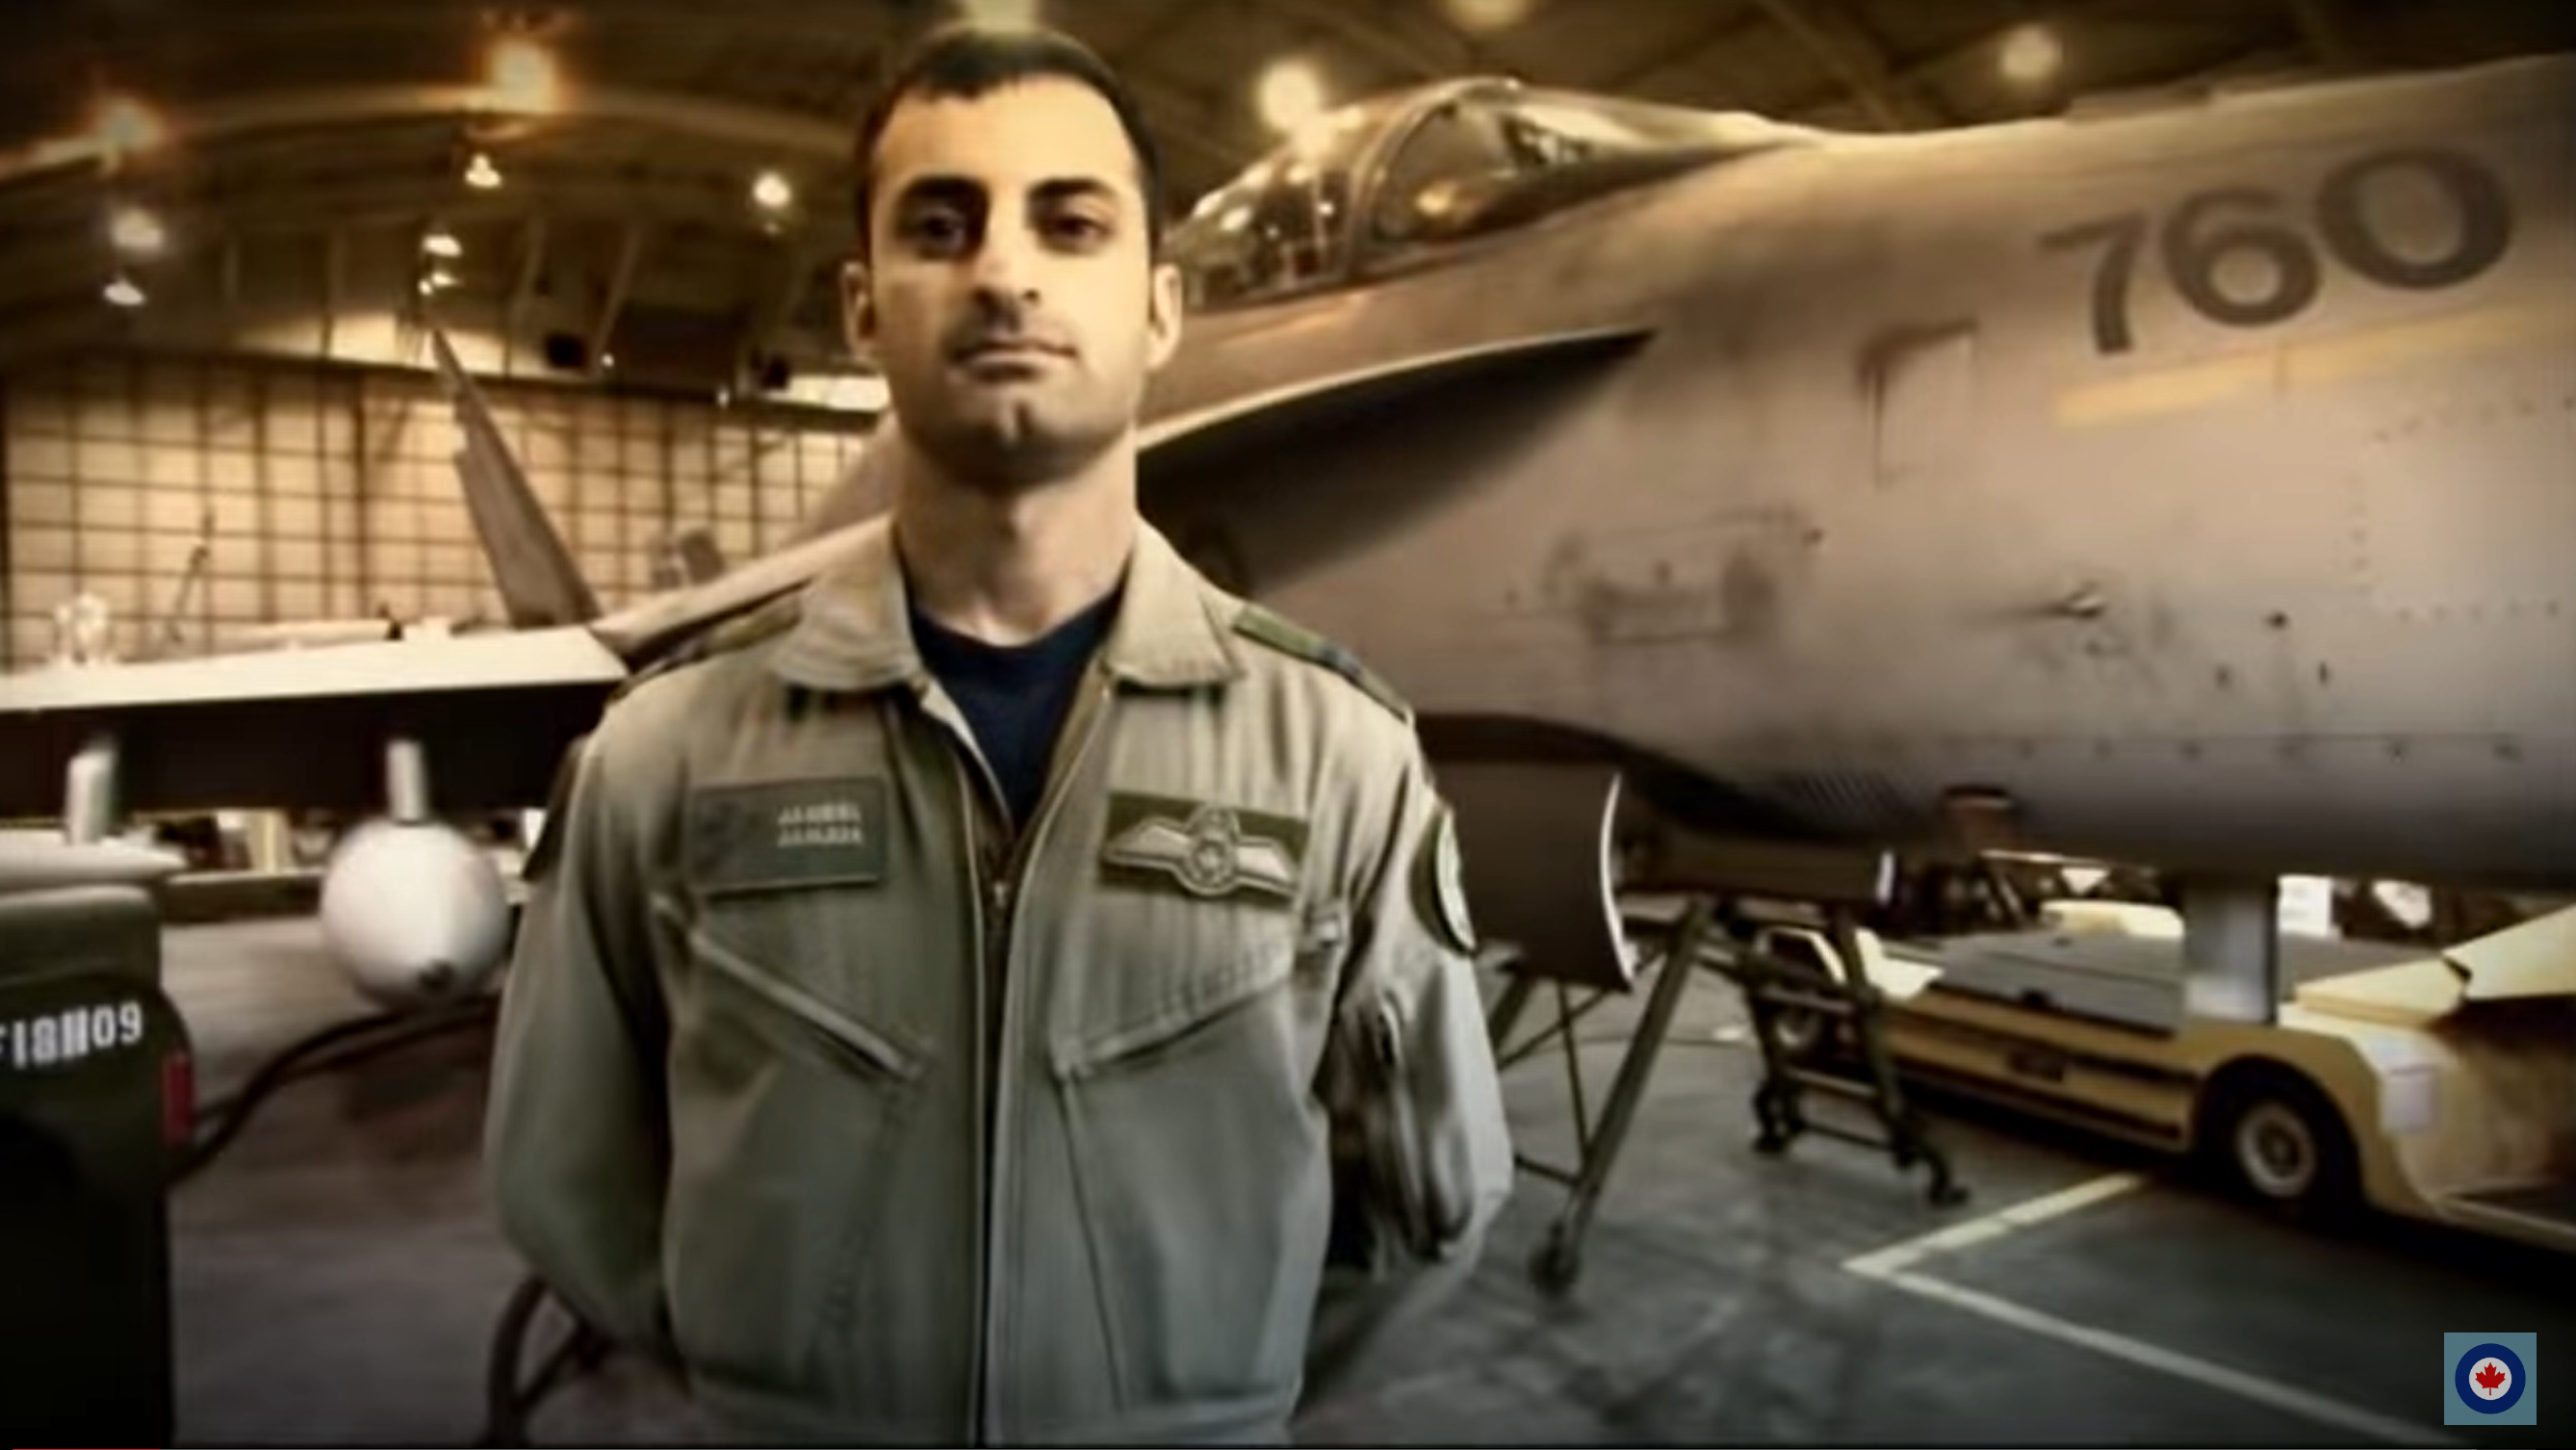 jameel janjua in a flight suit in front of a military airplane, in a hangar